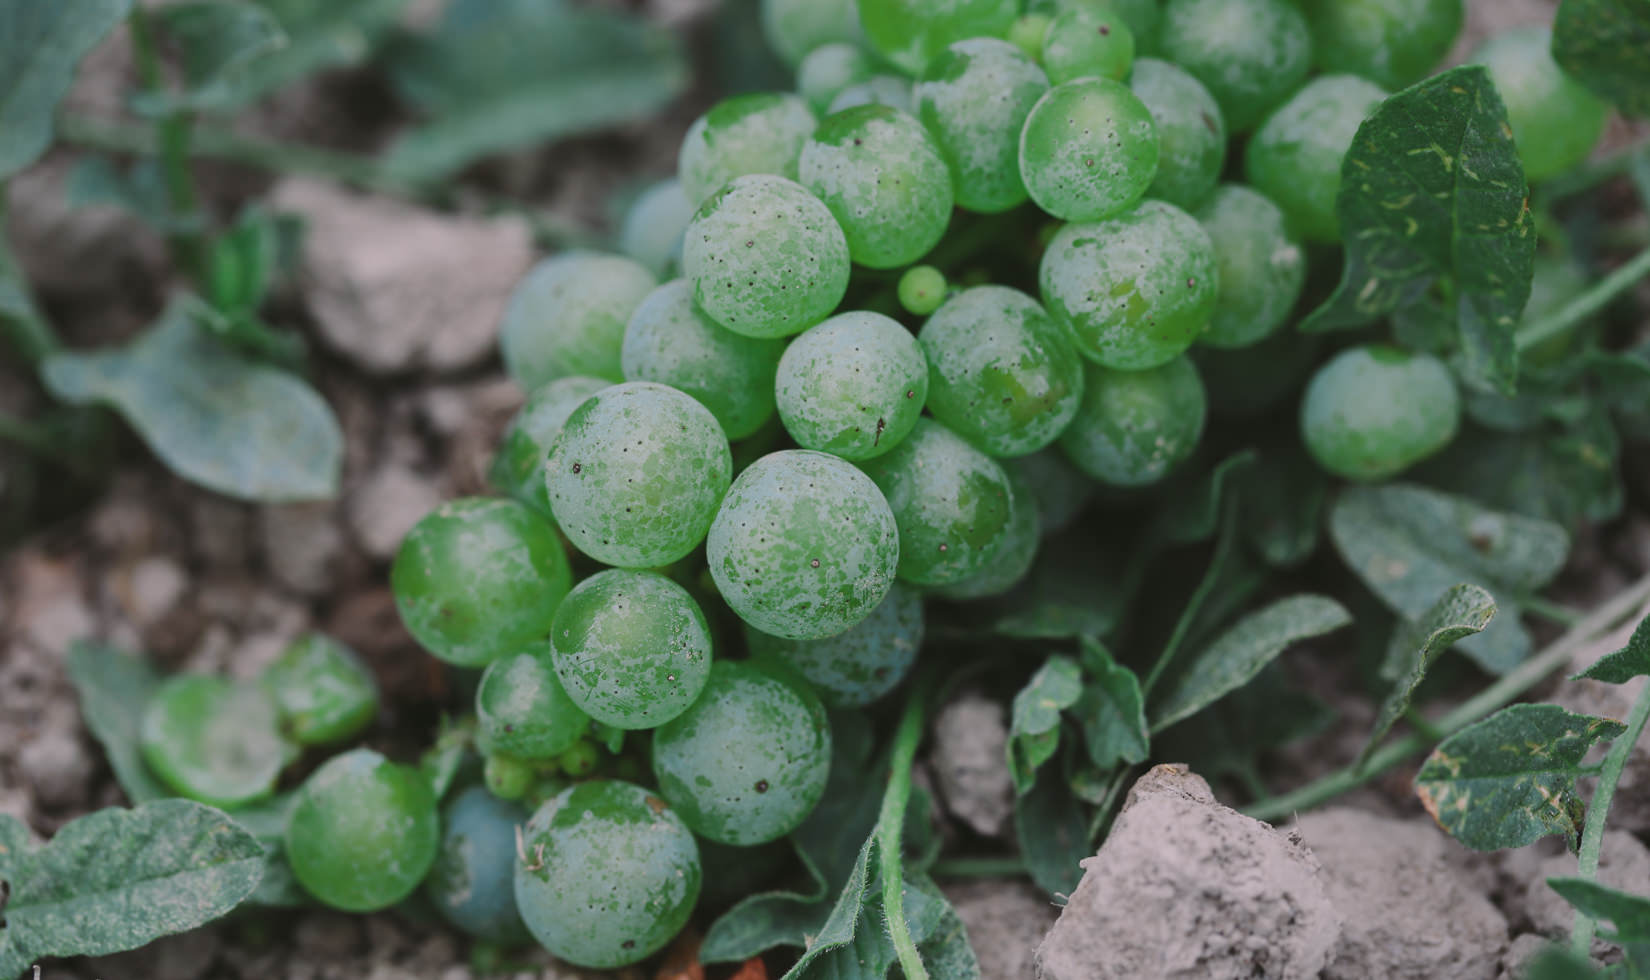 A cluster of chardonnay grapes is sacrificed to ensure uniform ripening of the remaining crop in 2016.